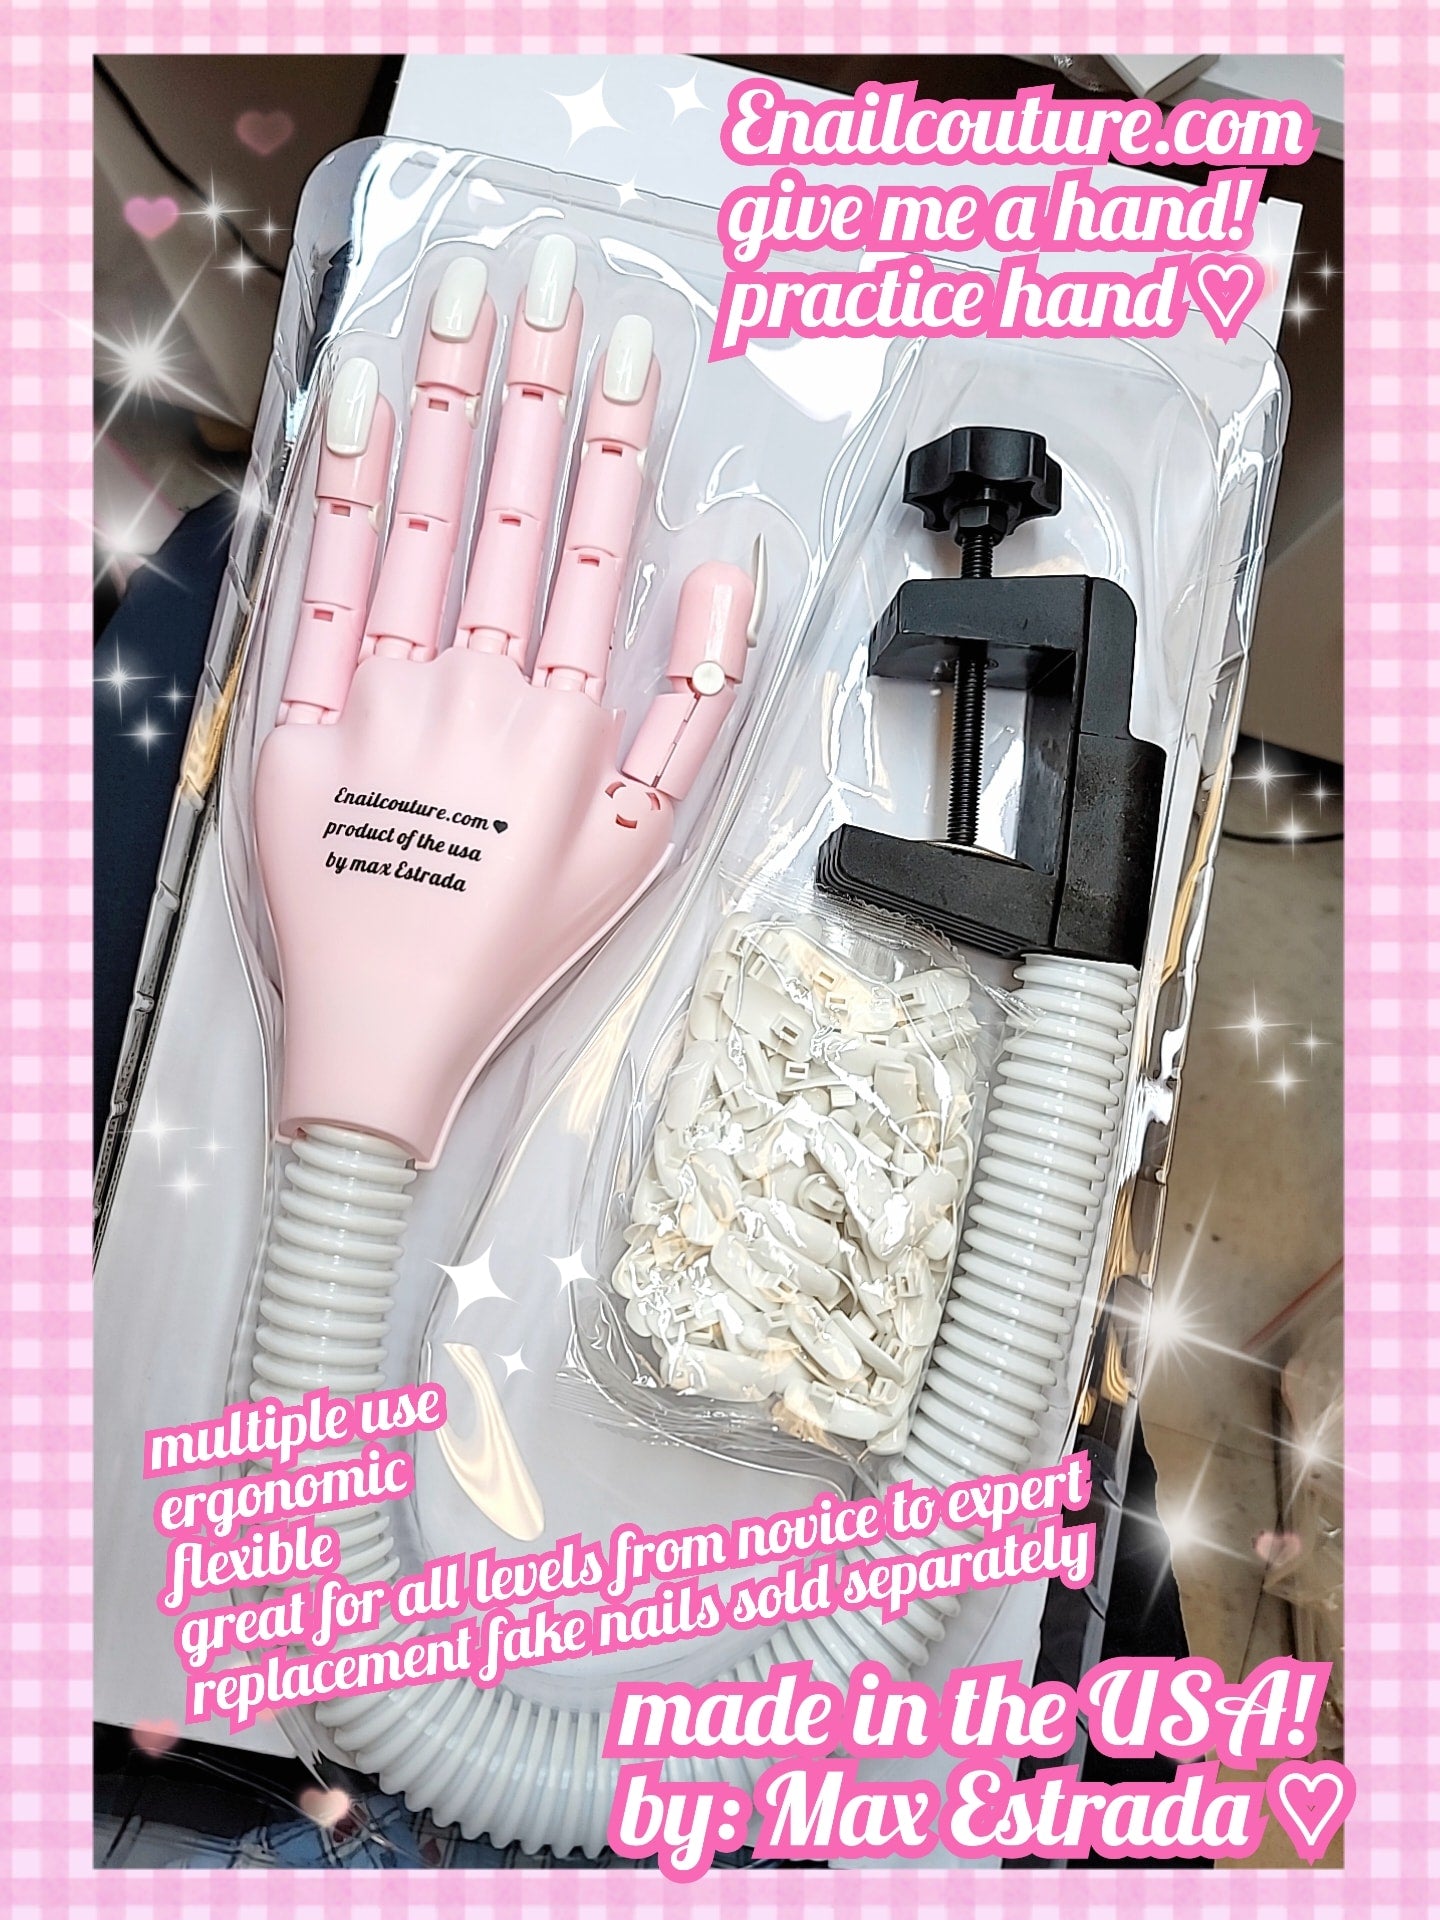 Nail Practice Hand for Acrylic Nails, Mannequin Hands for Nails Practice,  Flexible Fake Hands to Practice